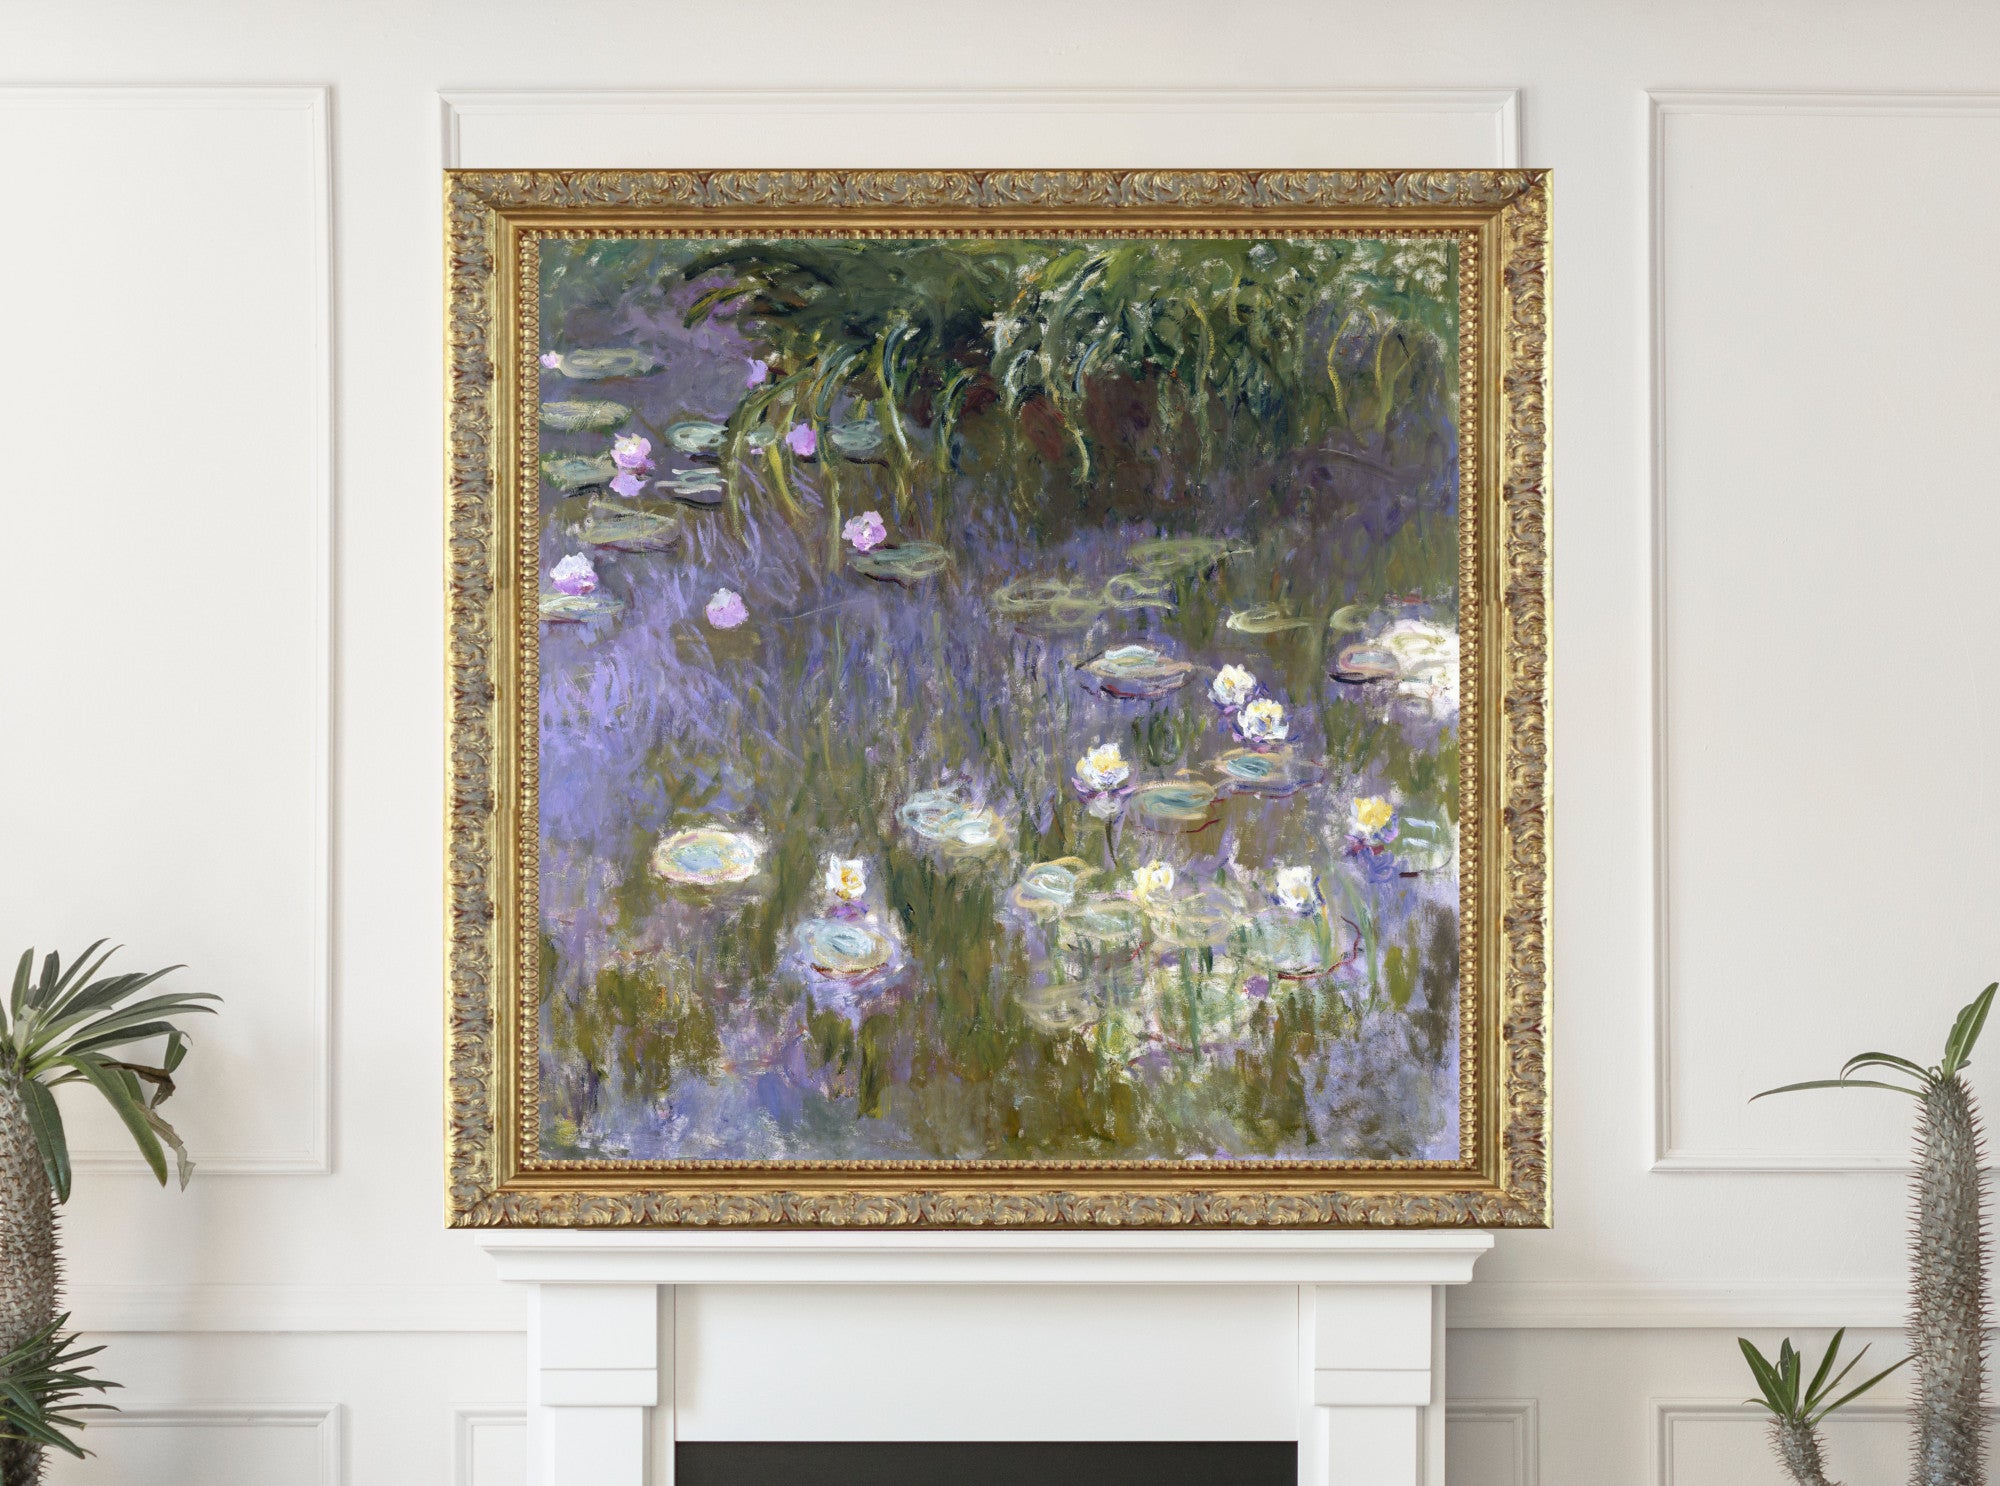 Water Lilies, Claude Monet (1922), Gallery Quality Canvas Reproduction